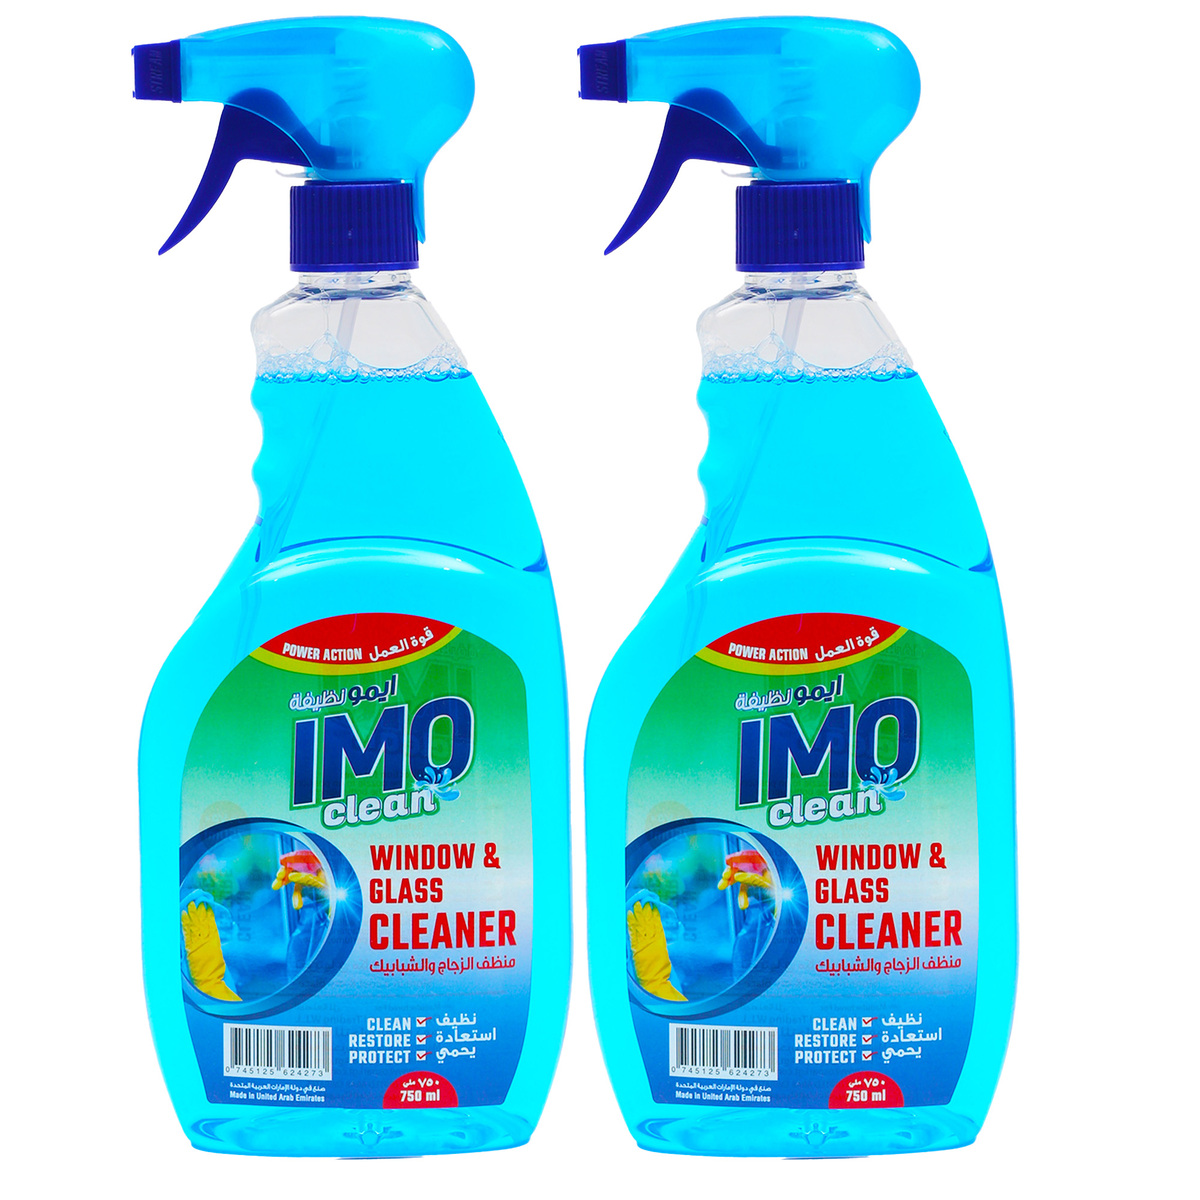 IMO Clean Window & Glass Cleaner Value Pack 2 x 750 ml